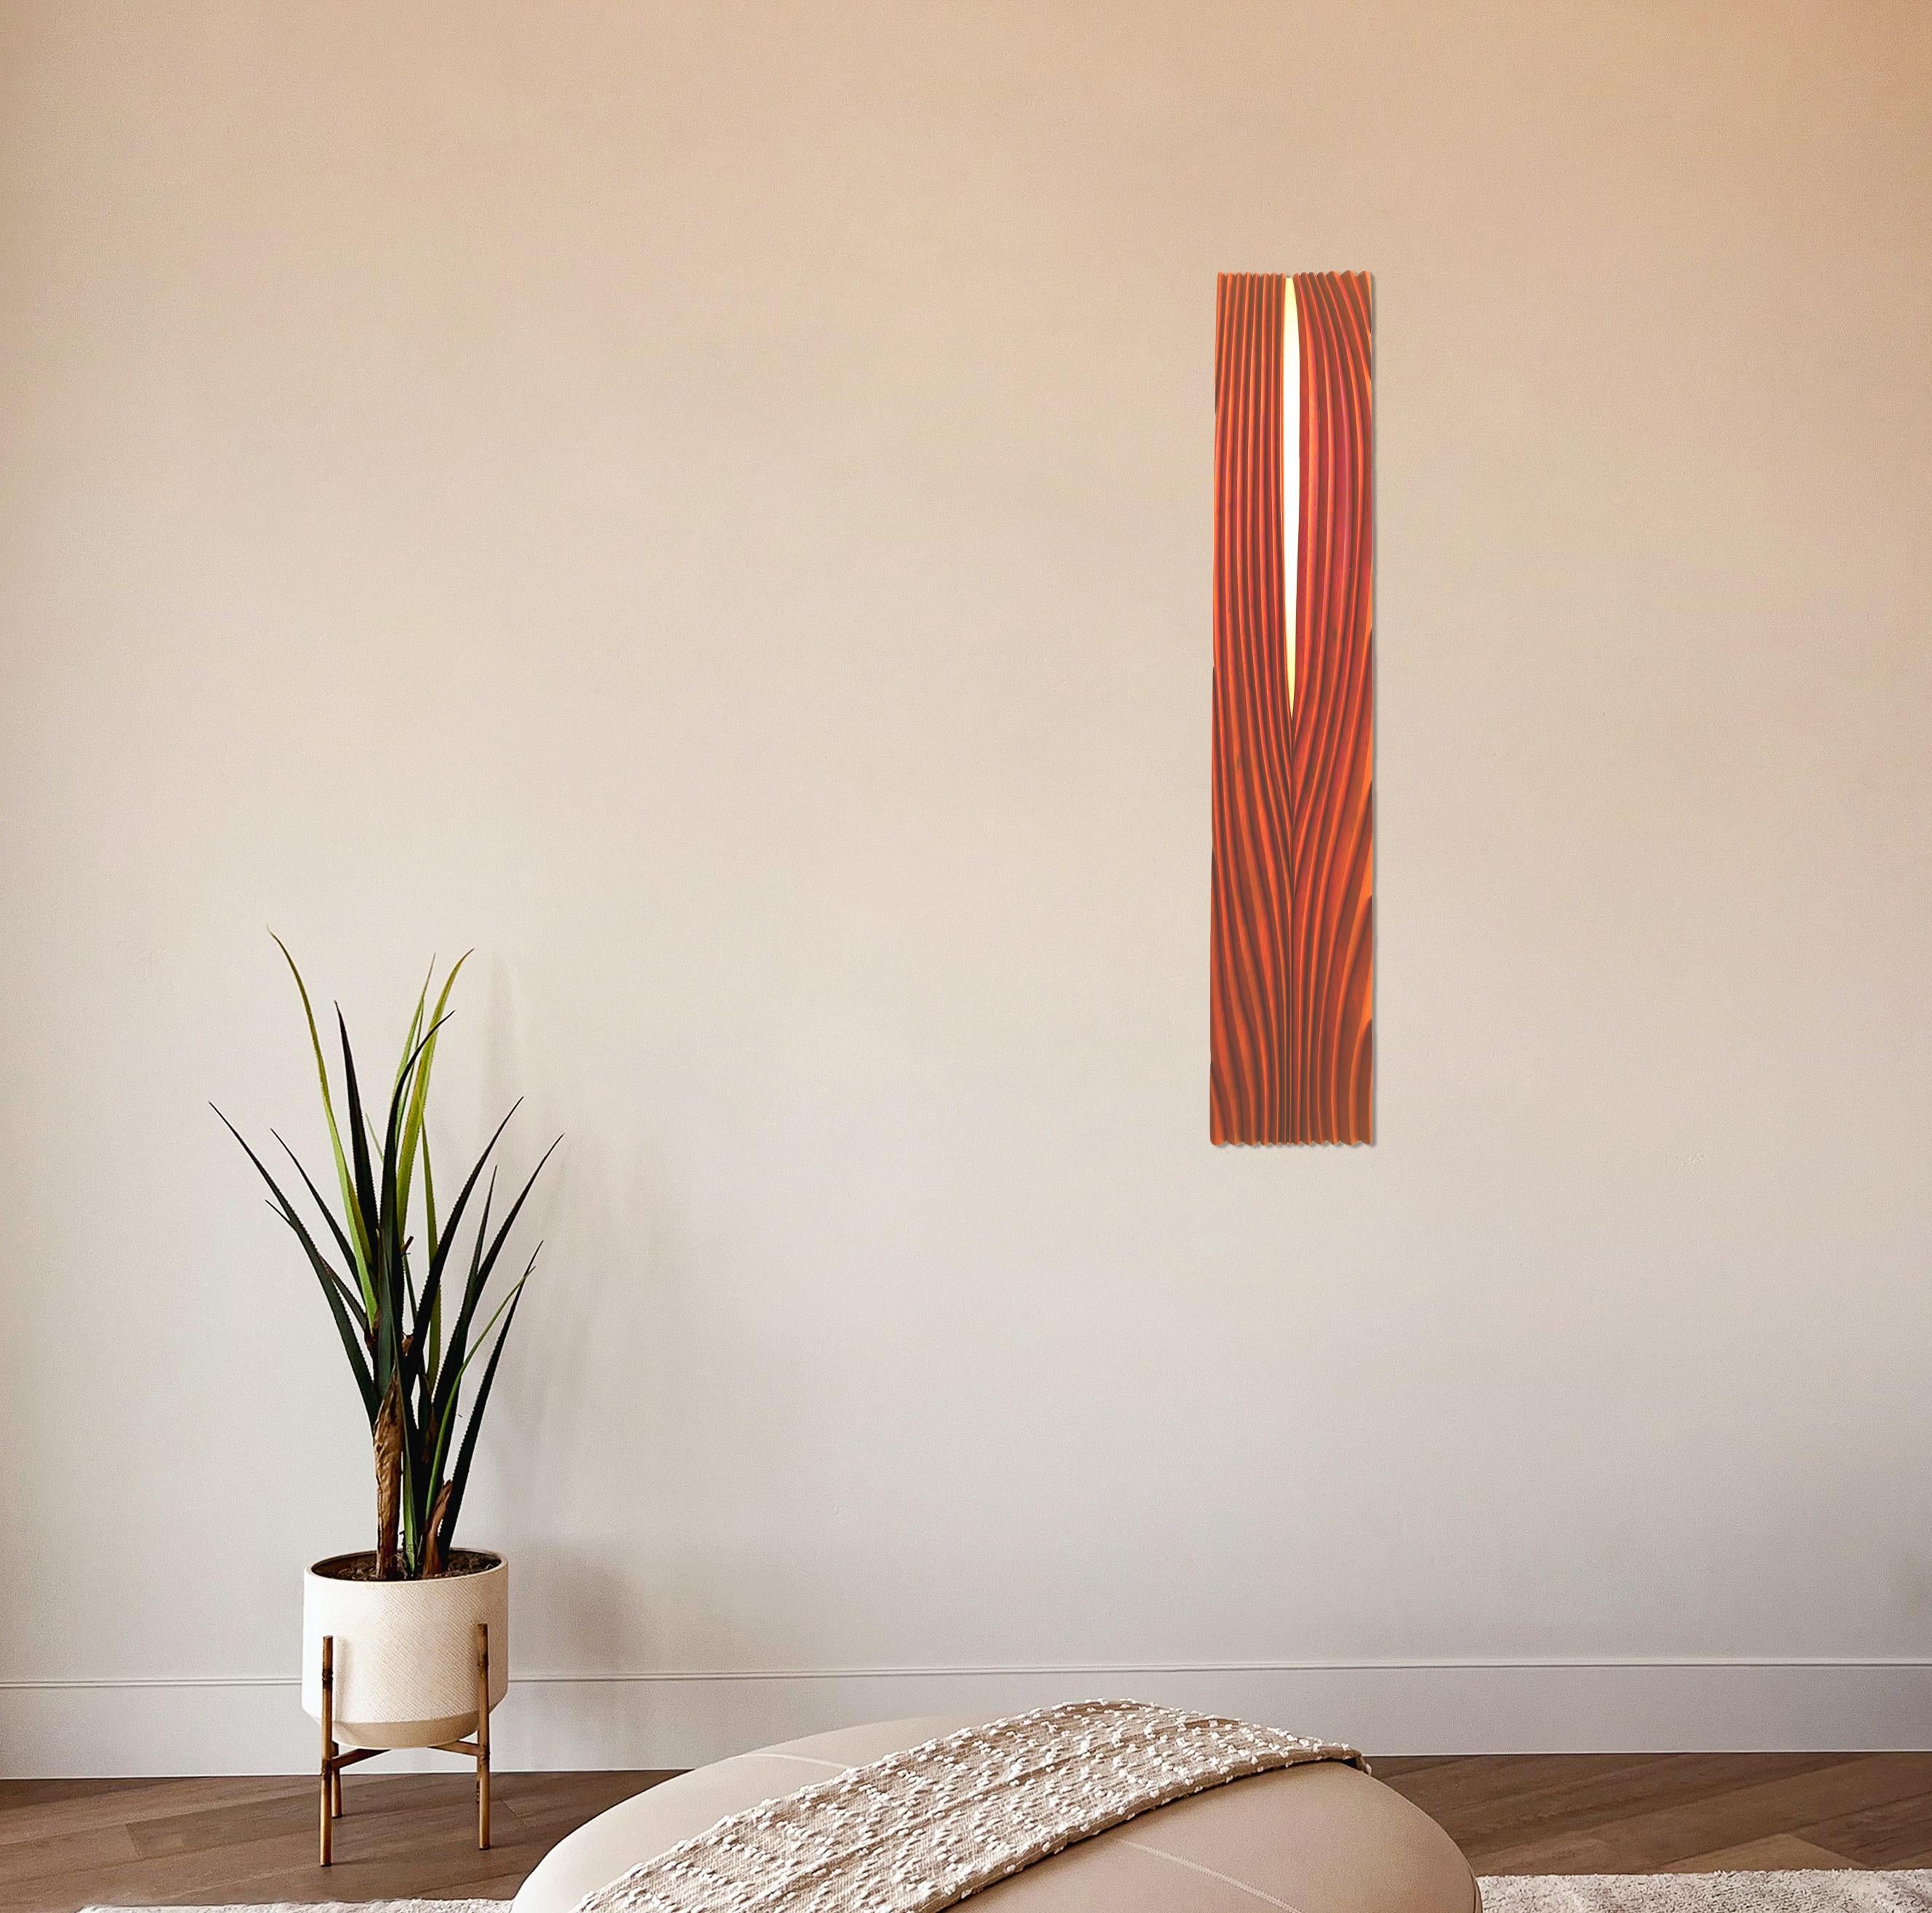 Brass Contemporary Wall Mounted Sculpture from 'Delta' Series by James Rowland